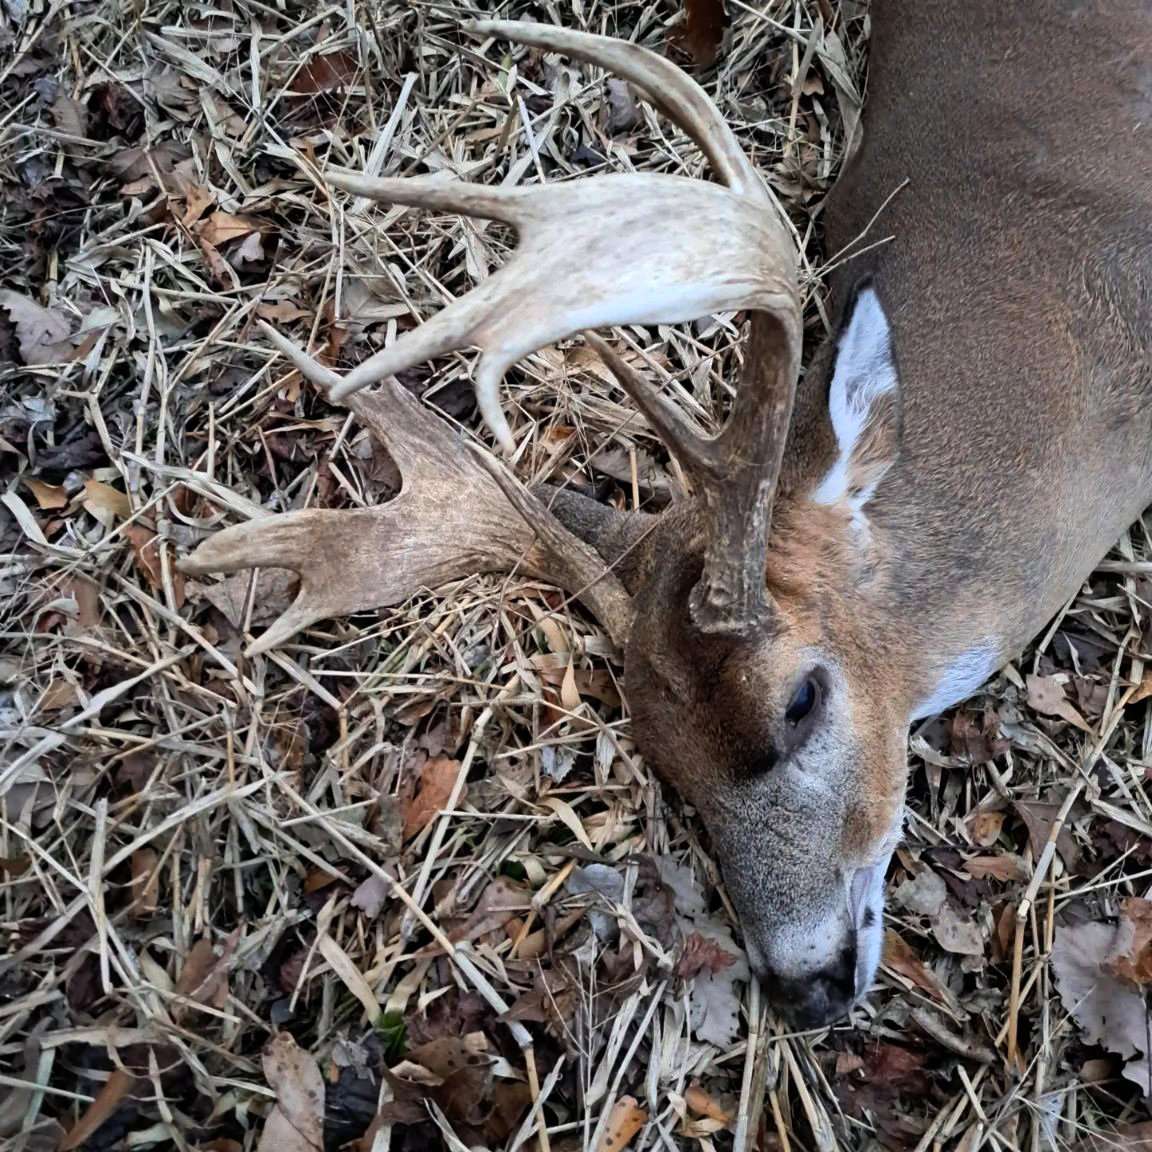 Even though Mcginty, his daughter and his brother had all been hunting the buck since October, this was the first daylight sighting of the deer.